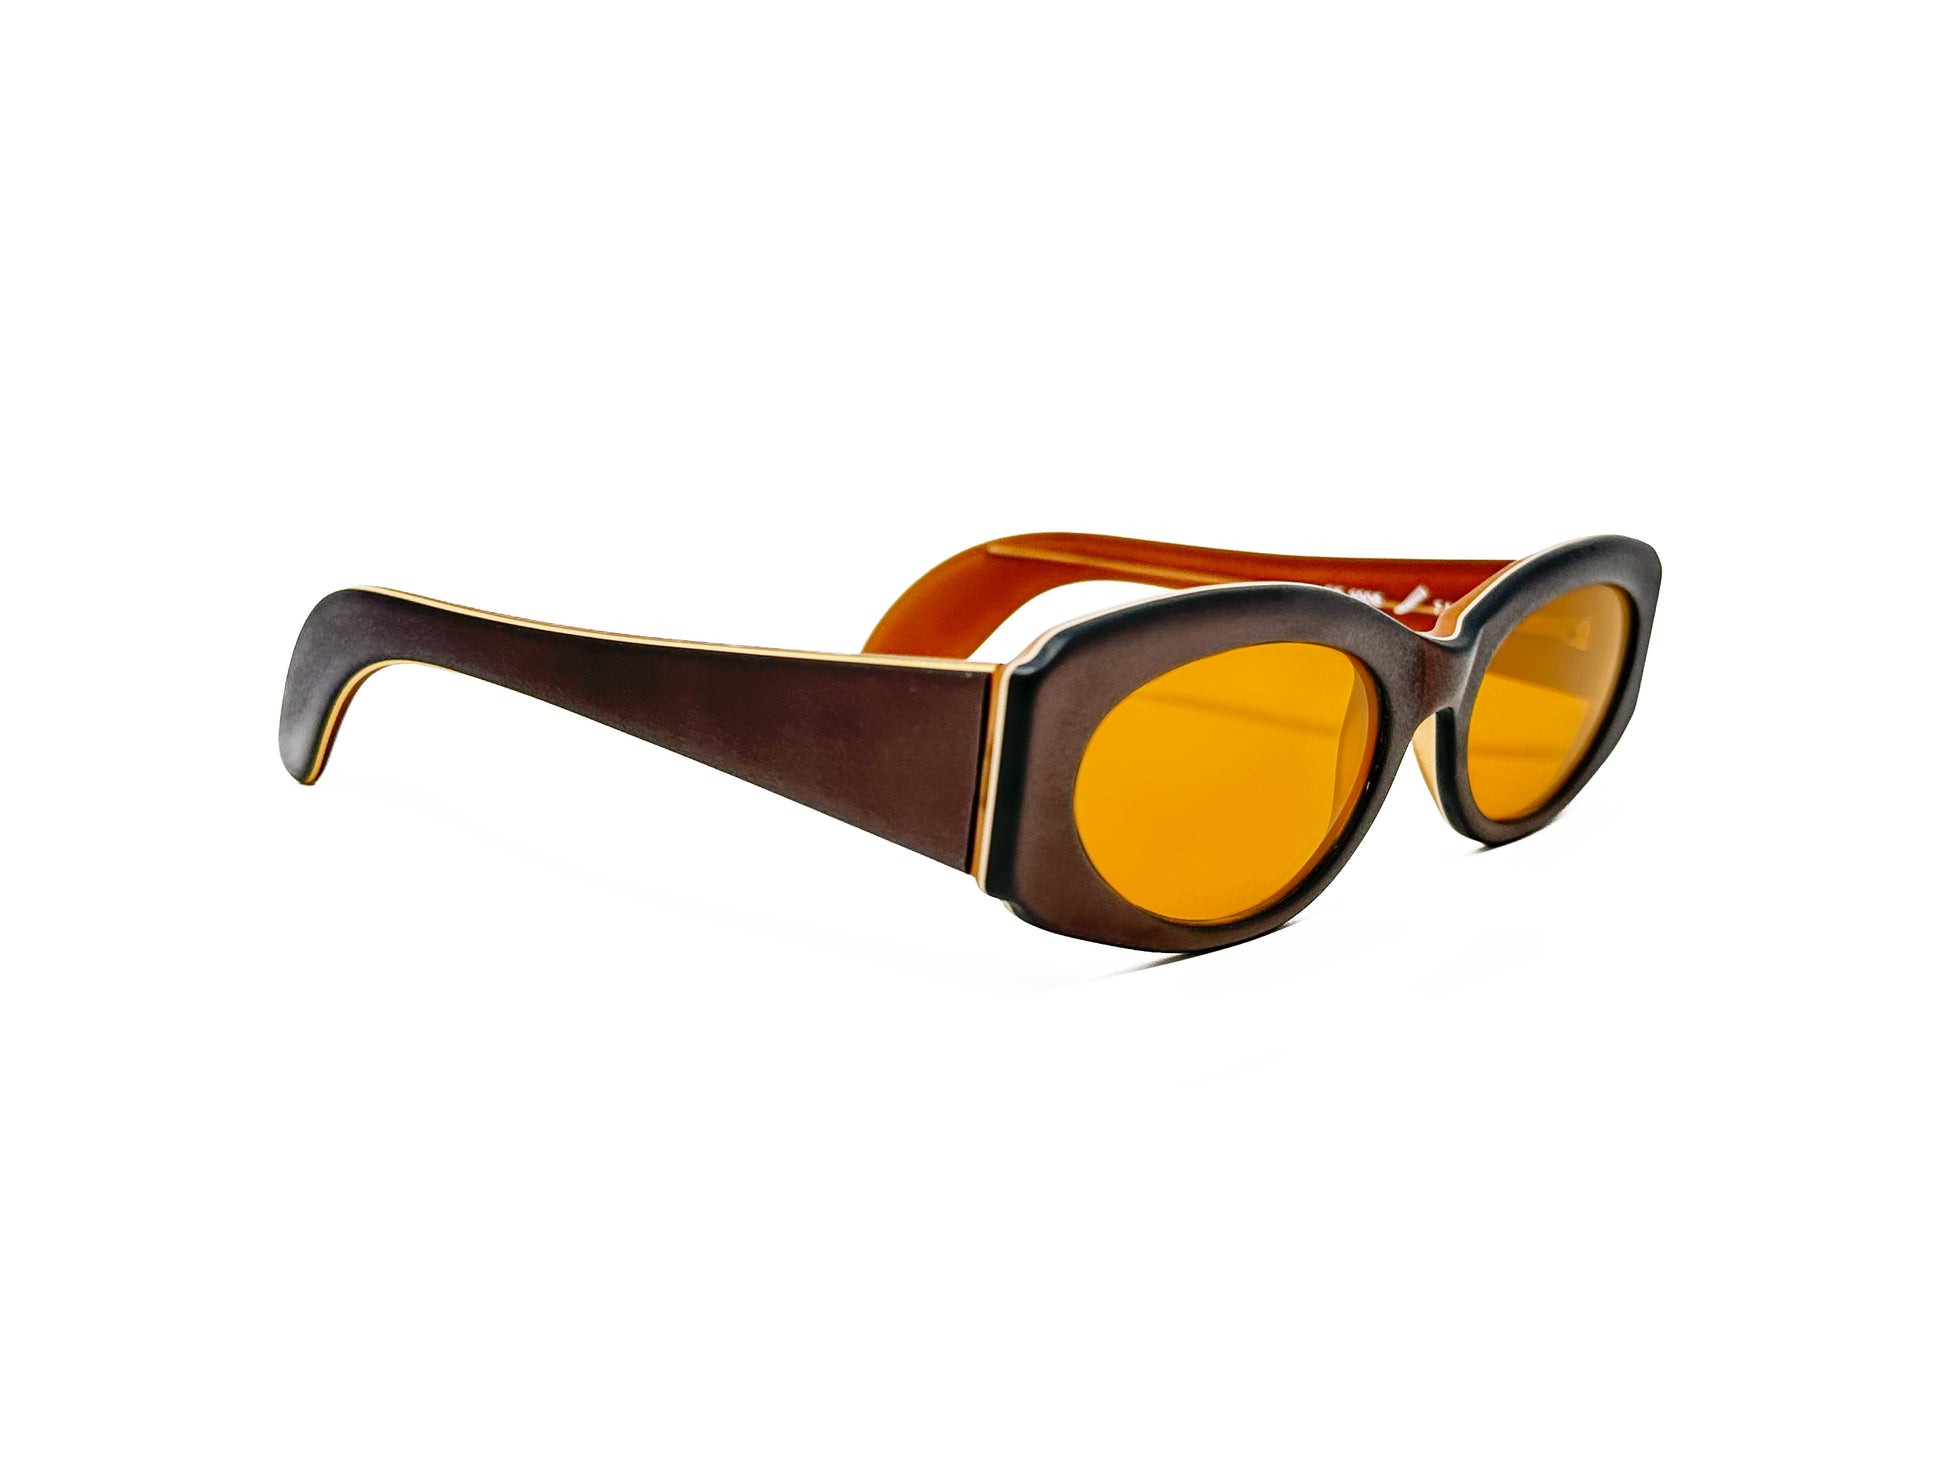 Kador oval sunglass with flat sides. MOdel: DF2006. Color: 7 MATT - Dark brown with light brown lenses. Side view.